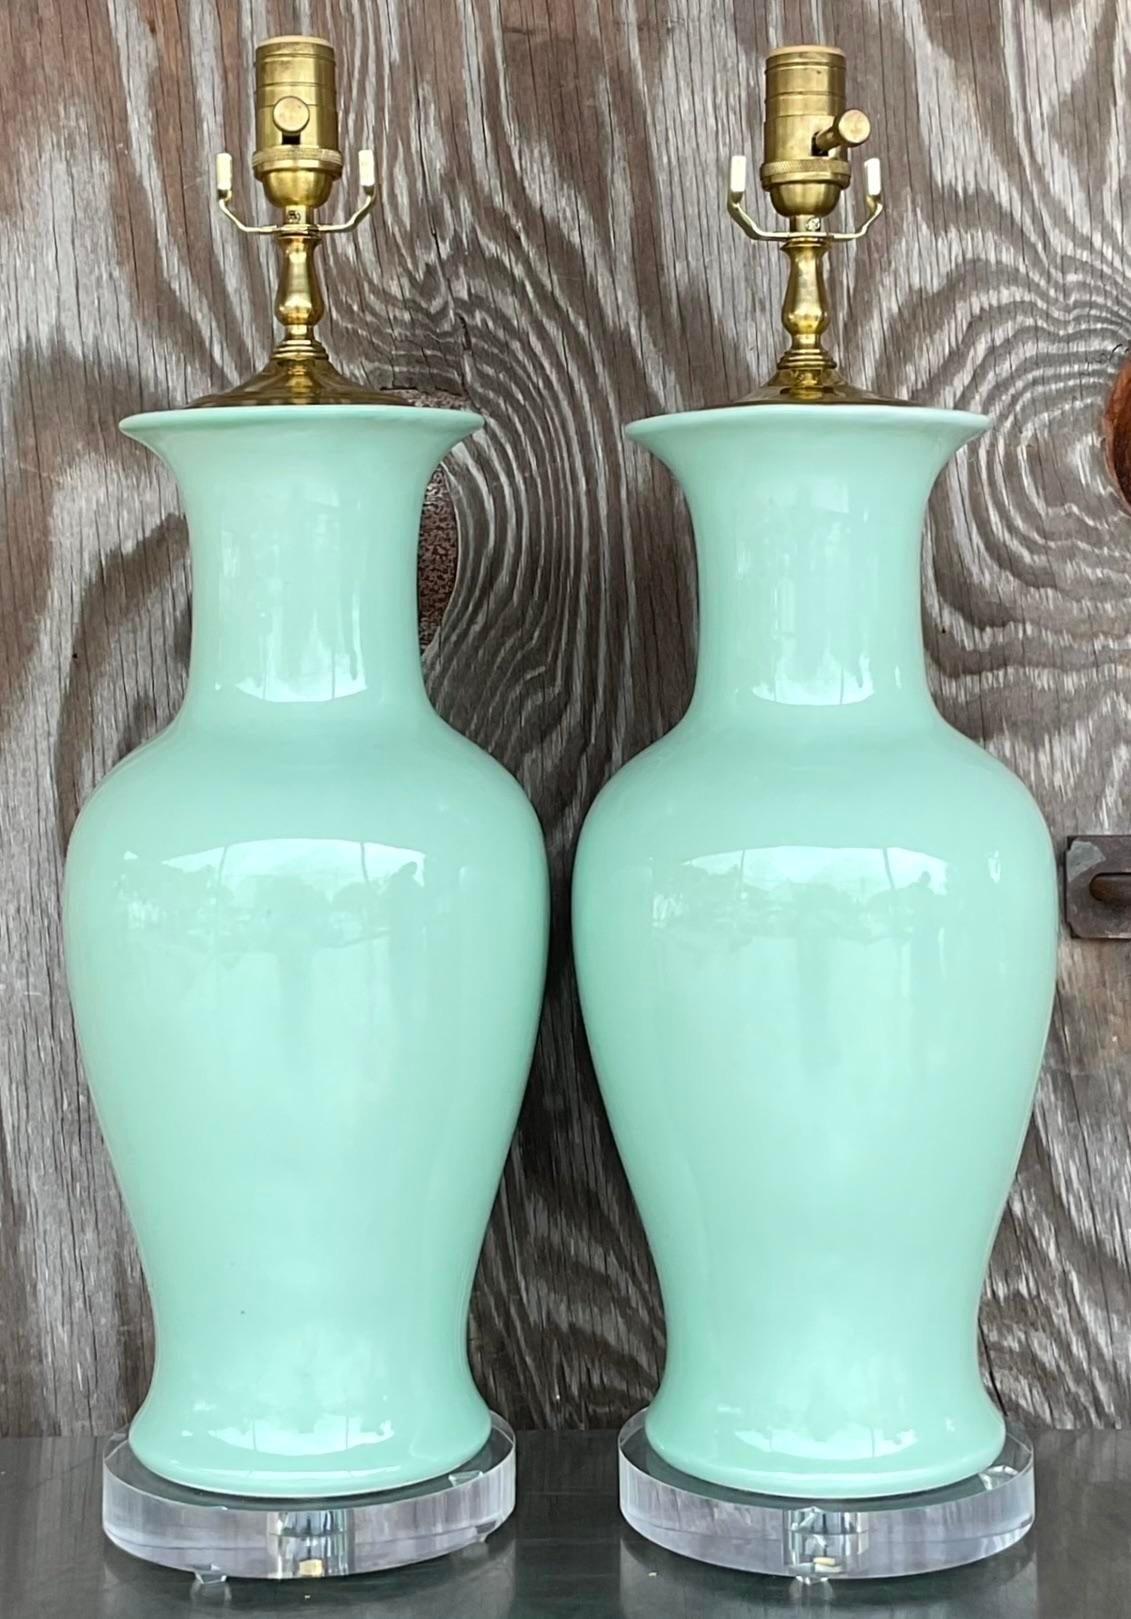 Late 20th Century Vintage Regency Glazed Ceramic Table Lamps - a Pair For Sale 2